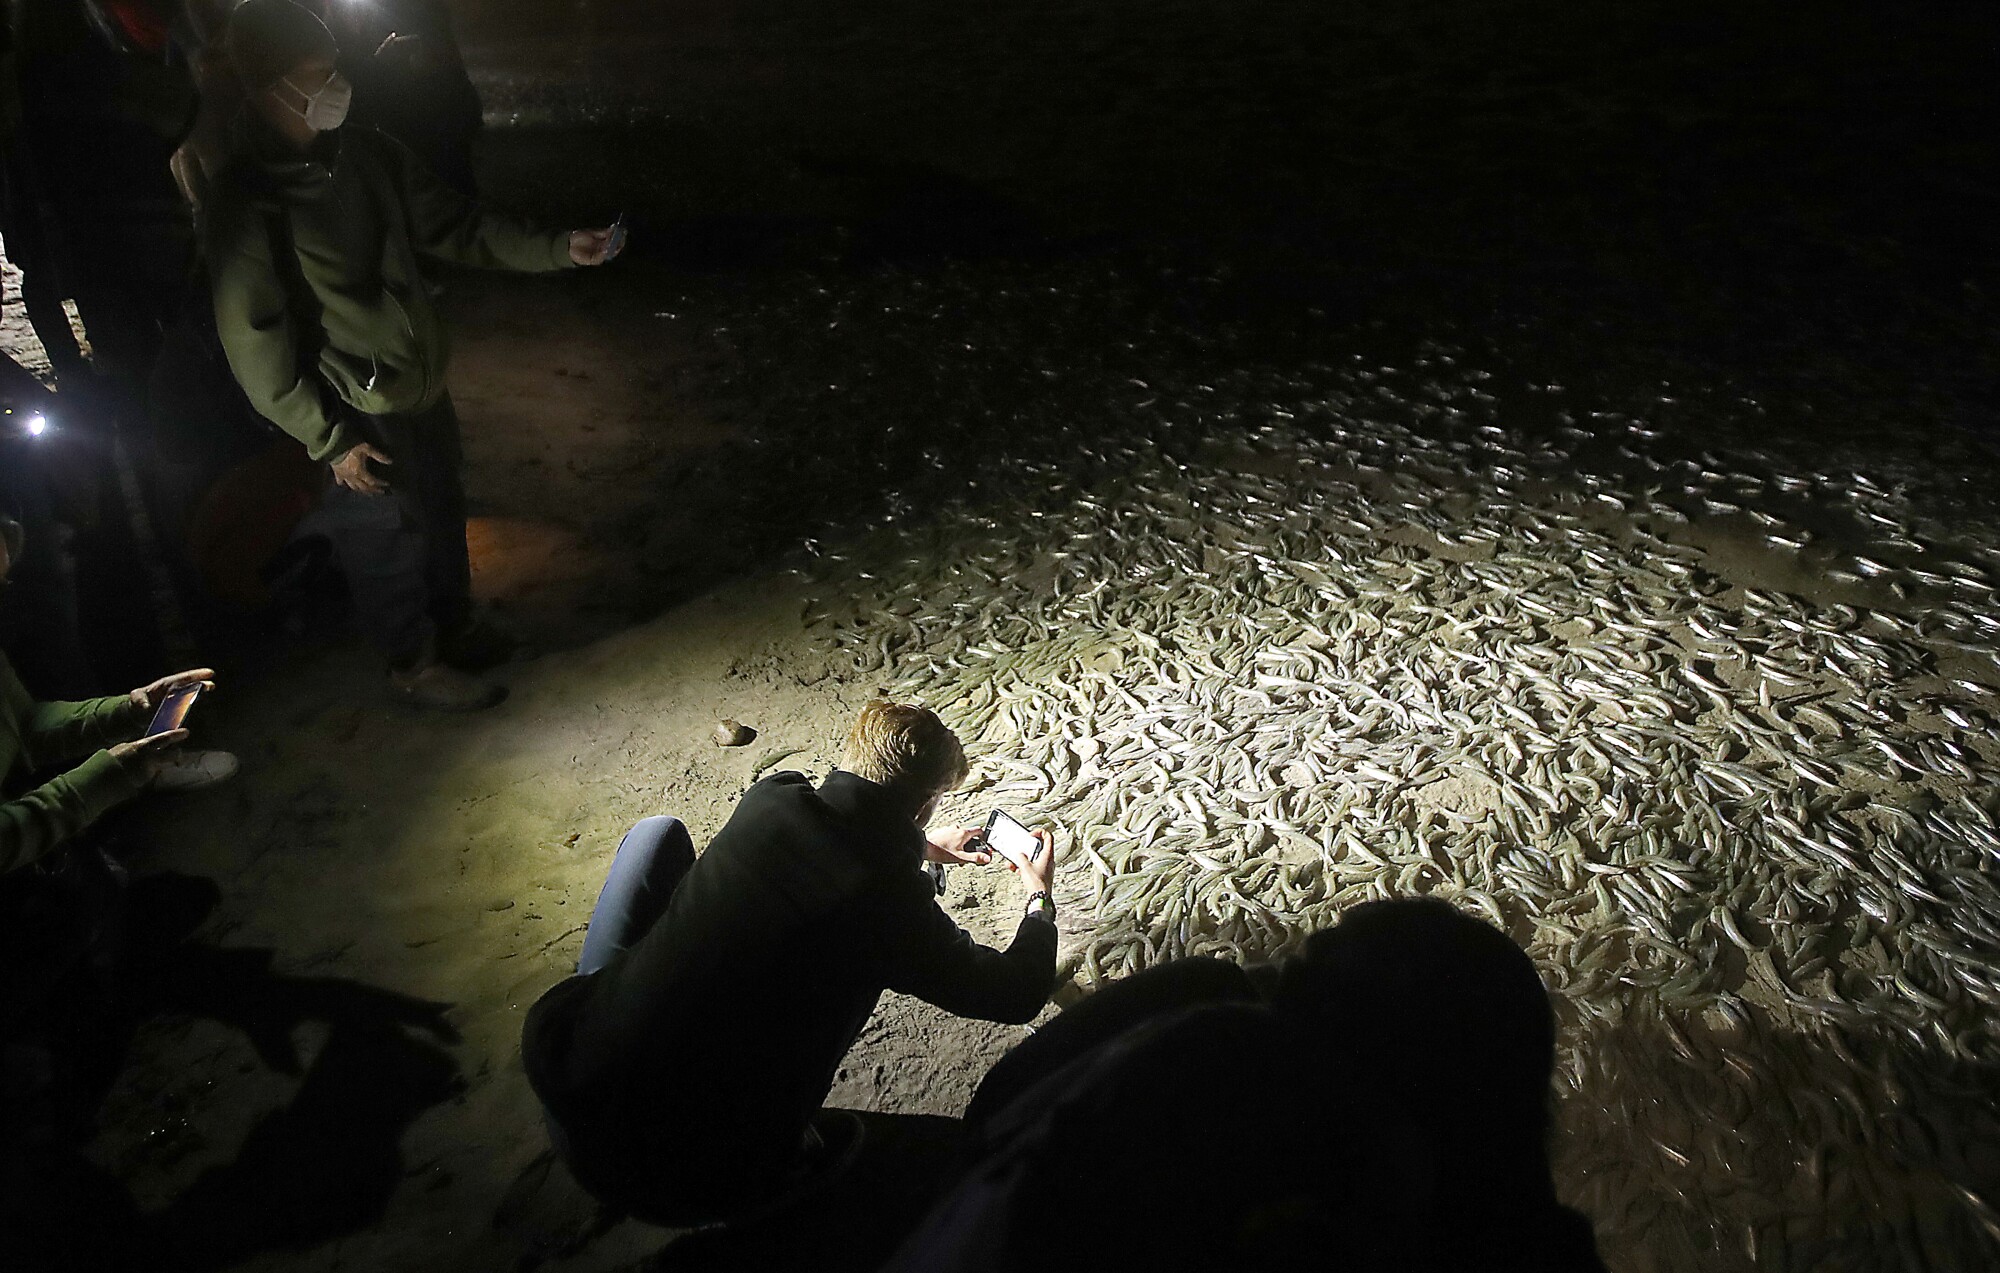 A man takes a picture of a lot of grunion